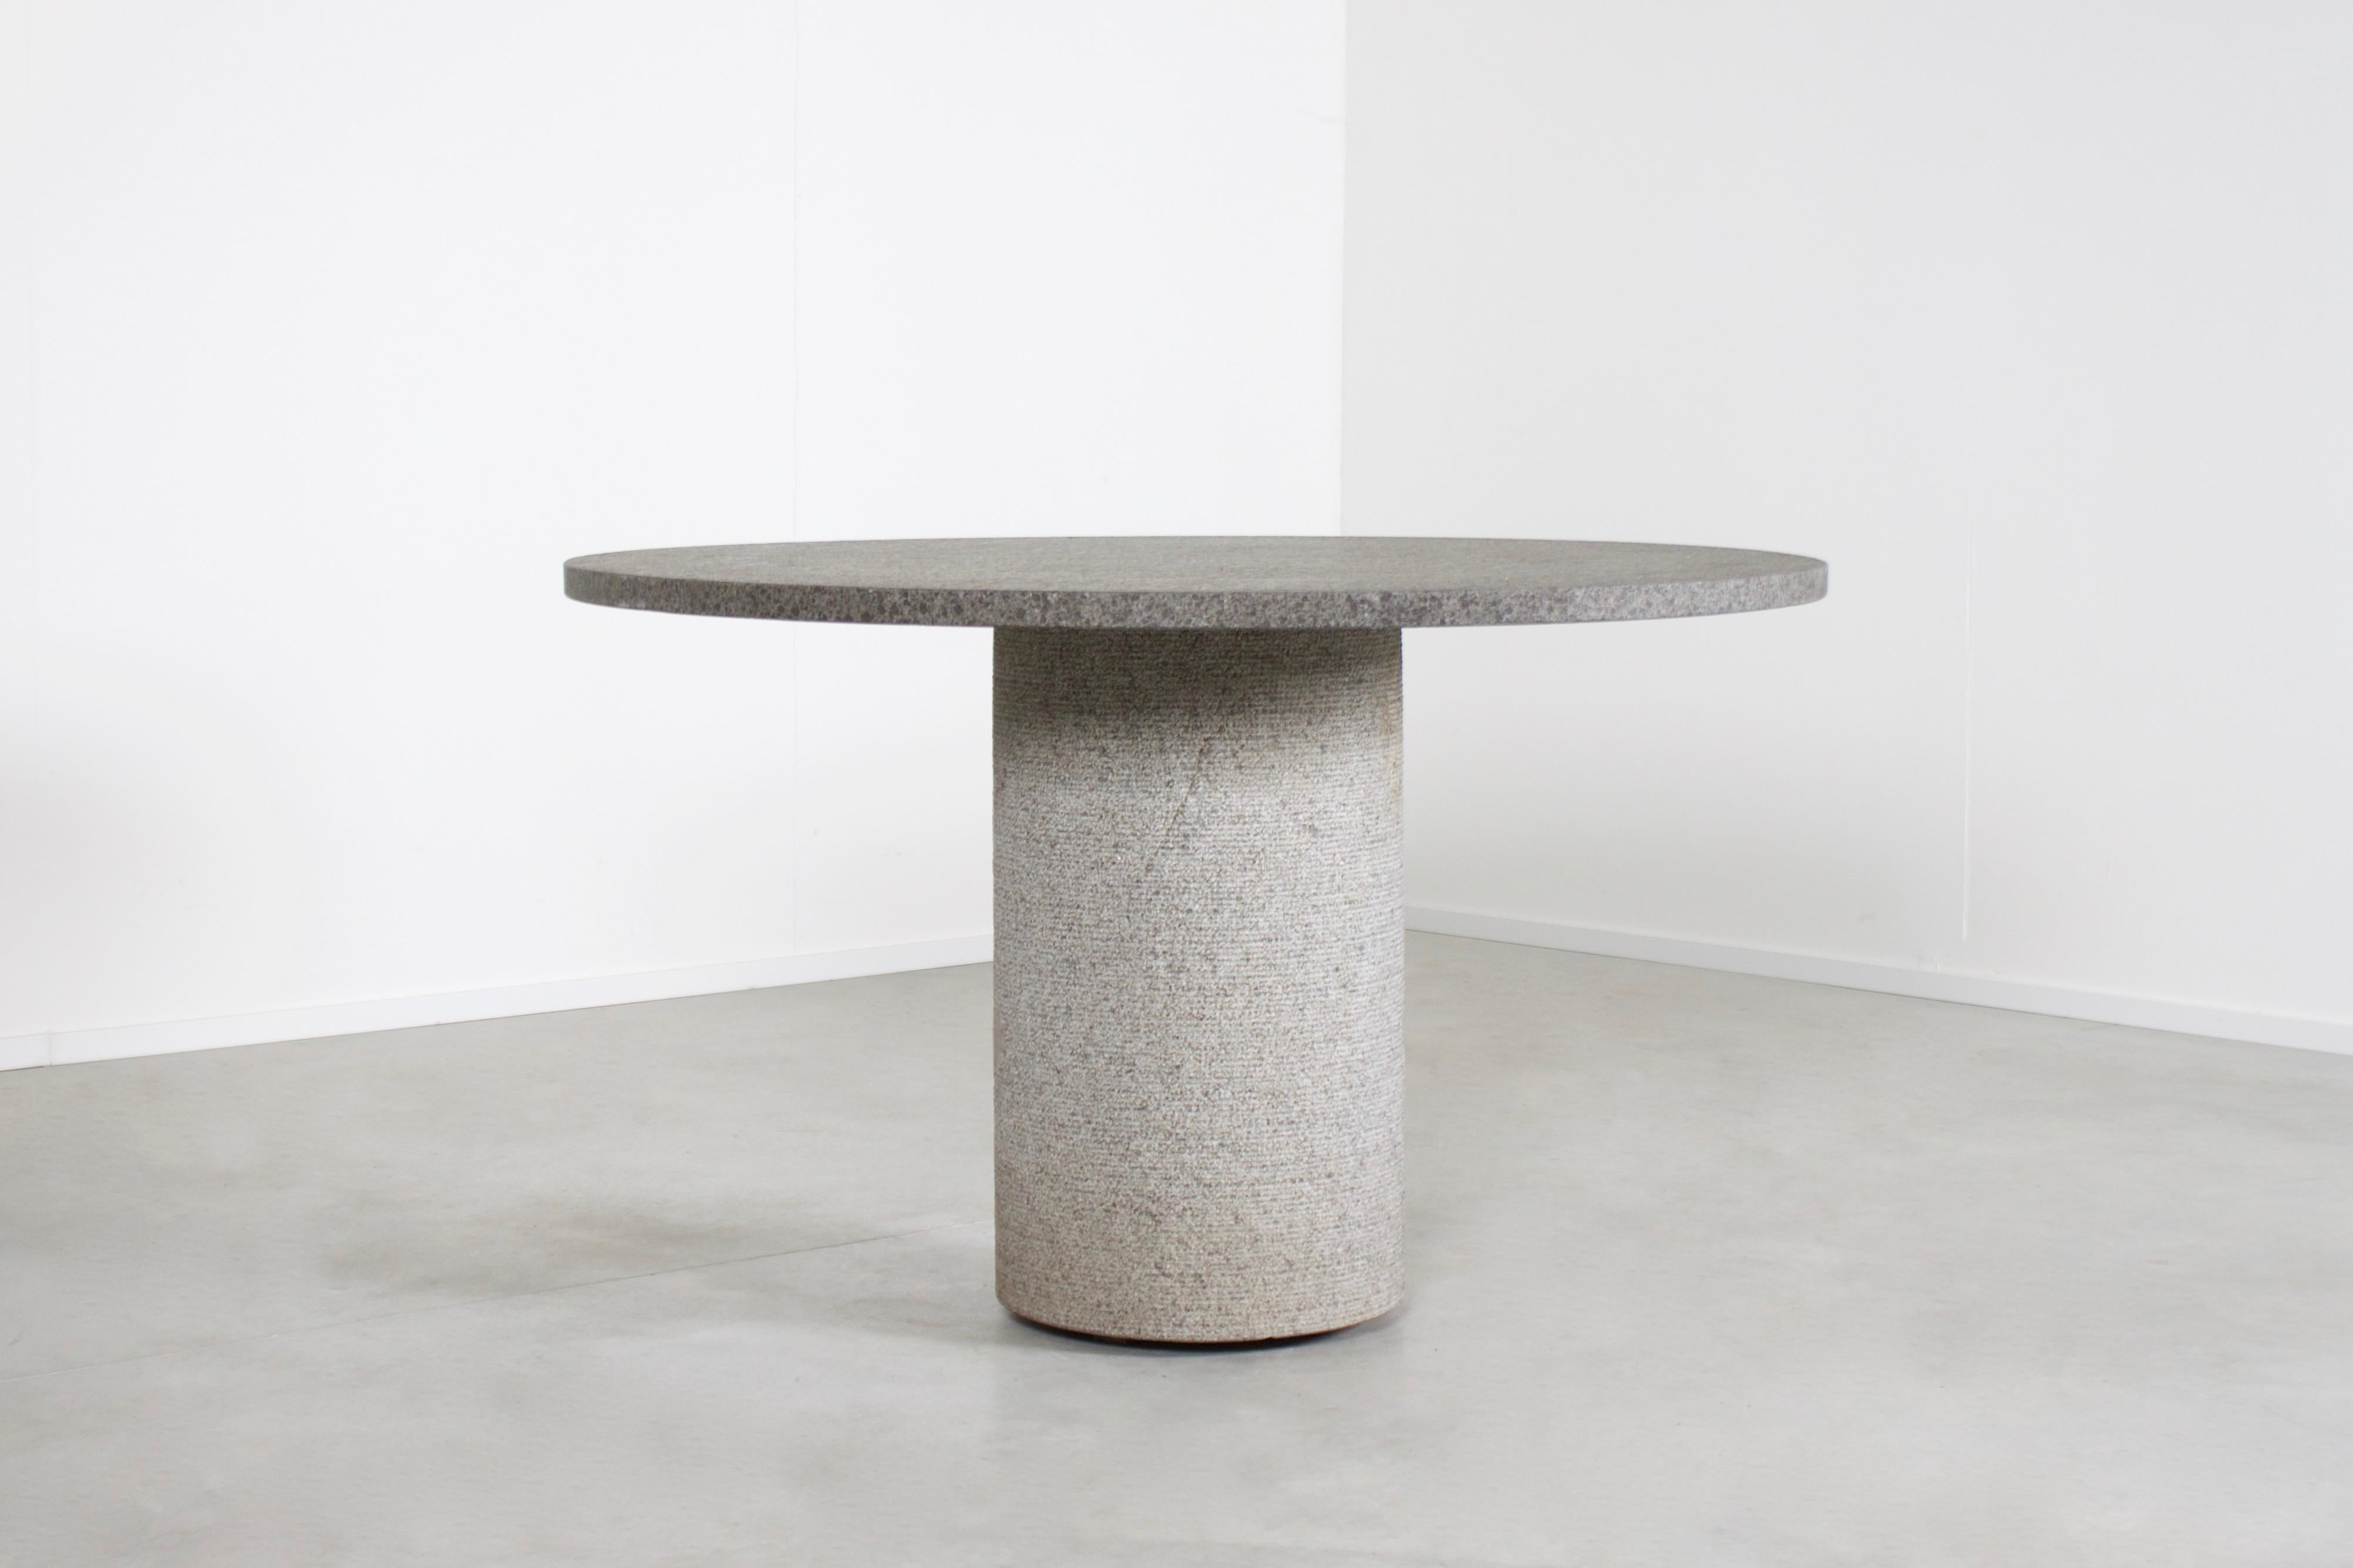 Round center/dining table in very good condition.

Made in Belgium in the 1970s 

The table is made of Belgian bluestone which gives it an impressive Brutalist look.

The bluestone has a beautiful rough structure which adds to the Brutalist